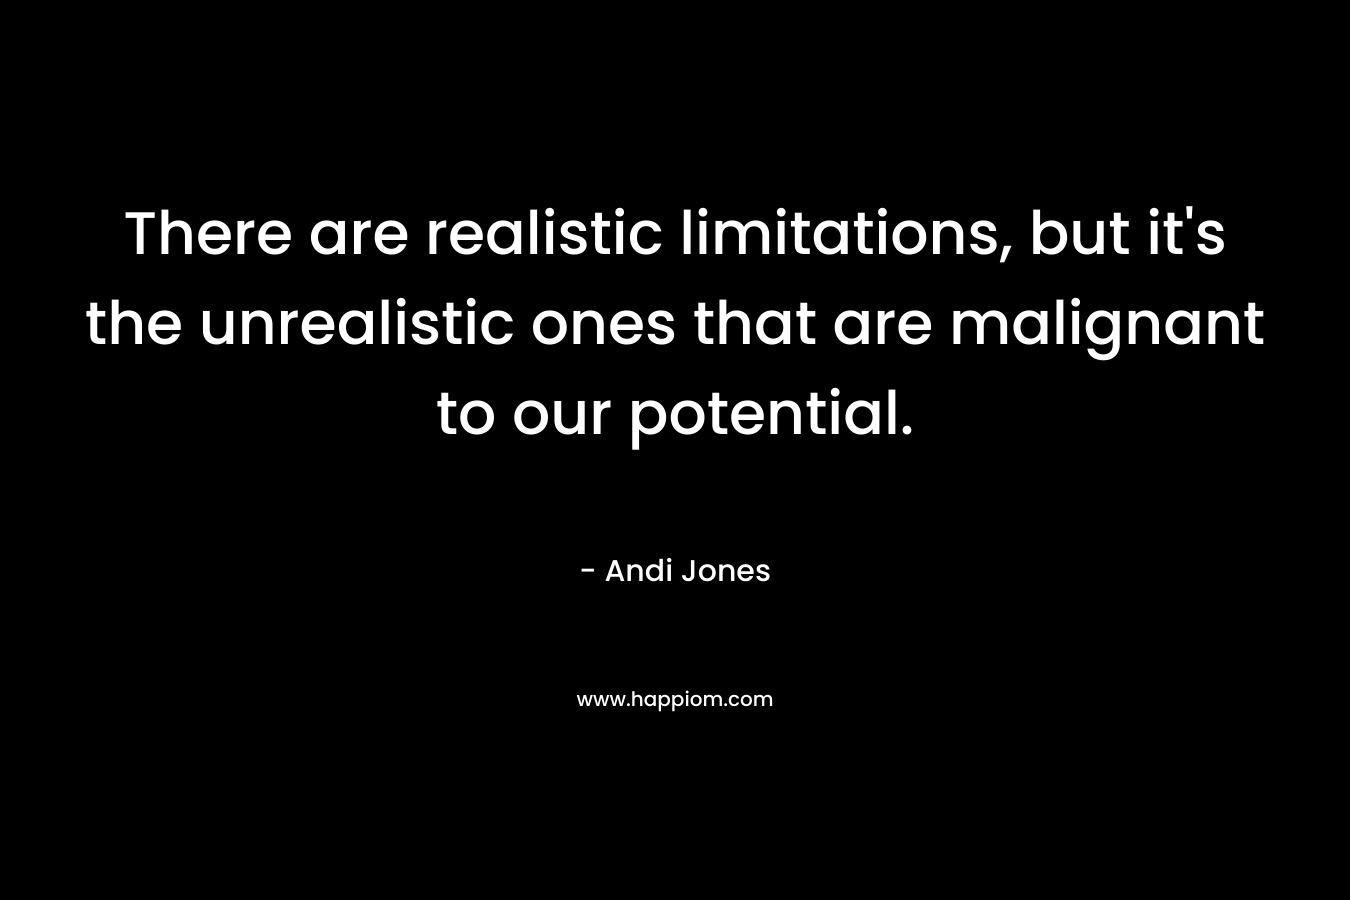 There are realistic limitations, but it's the unrealistic ones that are malignant to our potential.